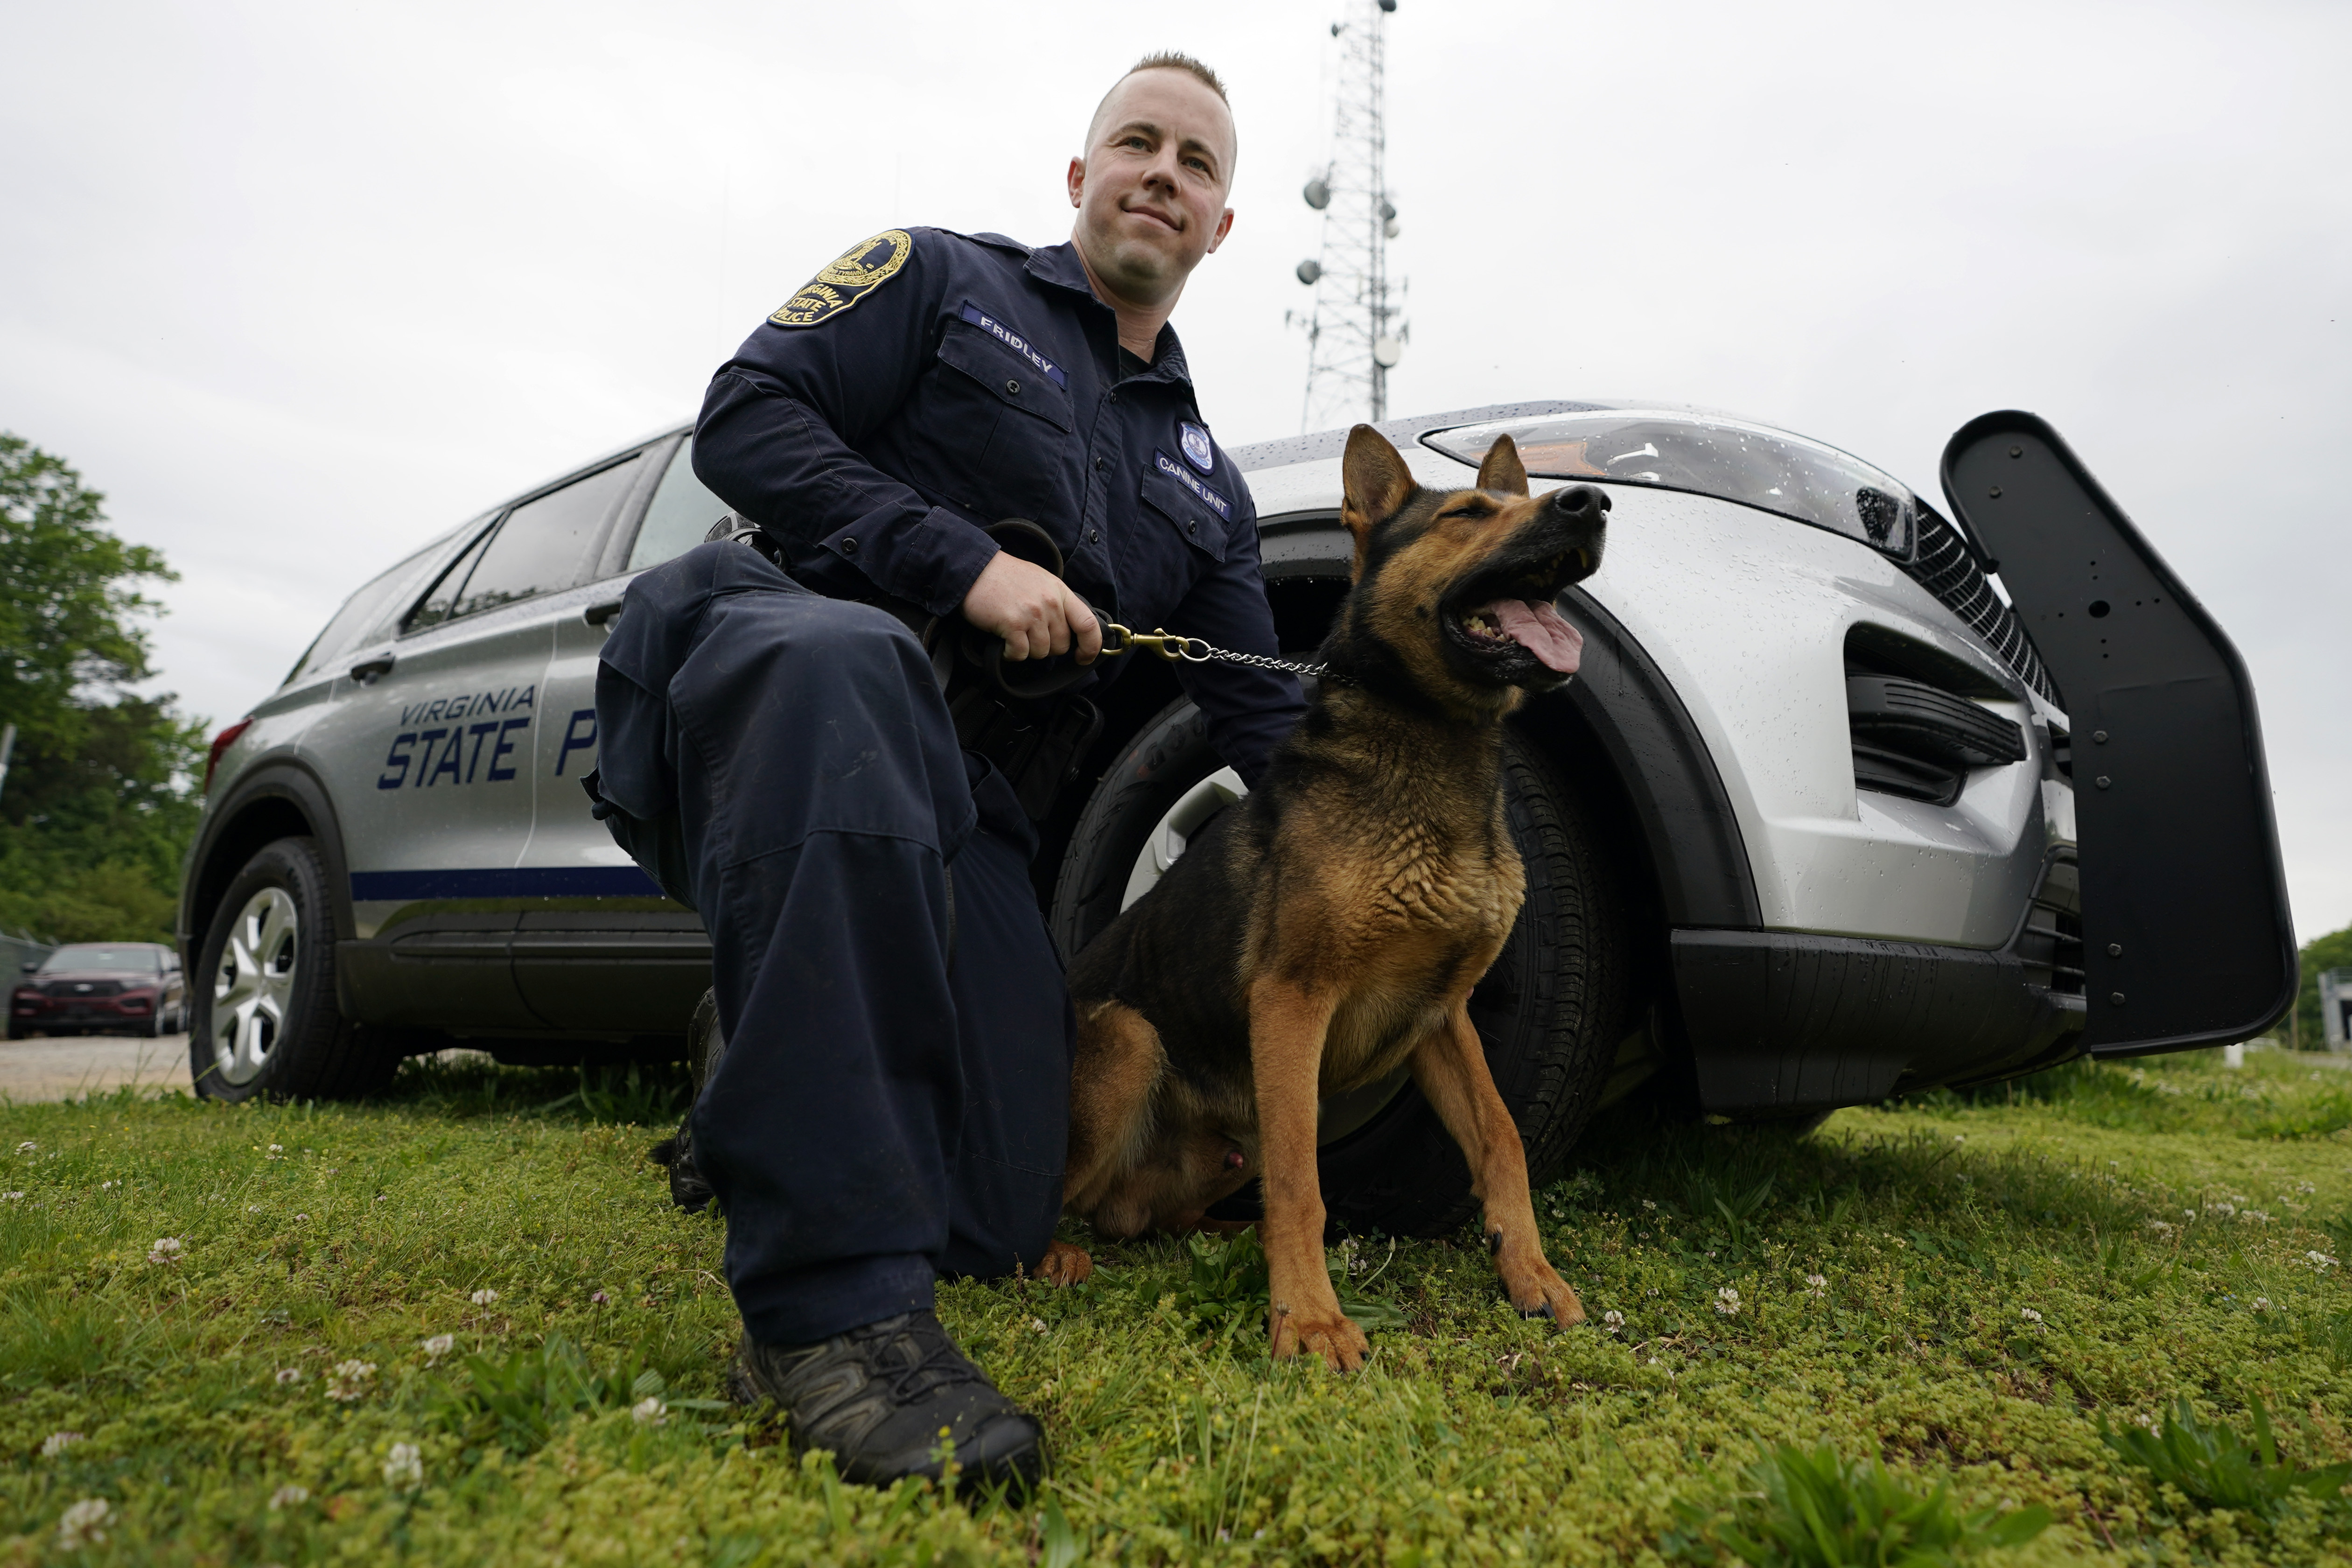 A police officer and his dog